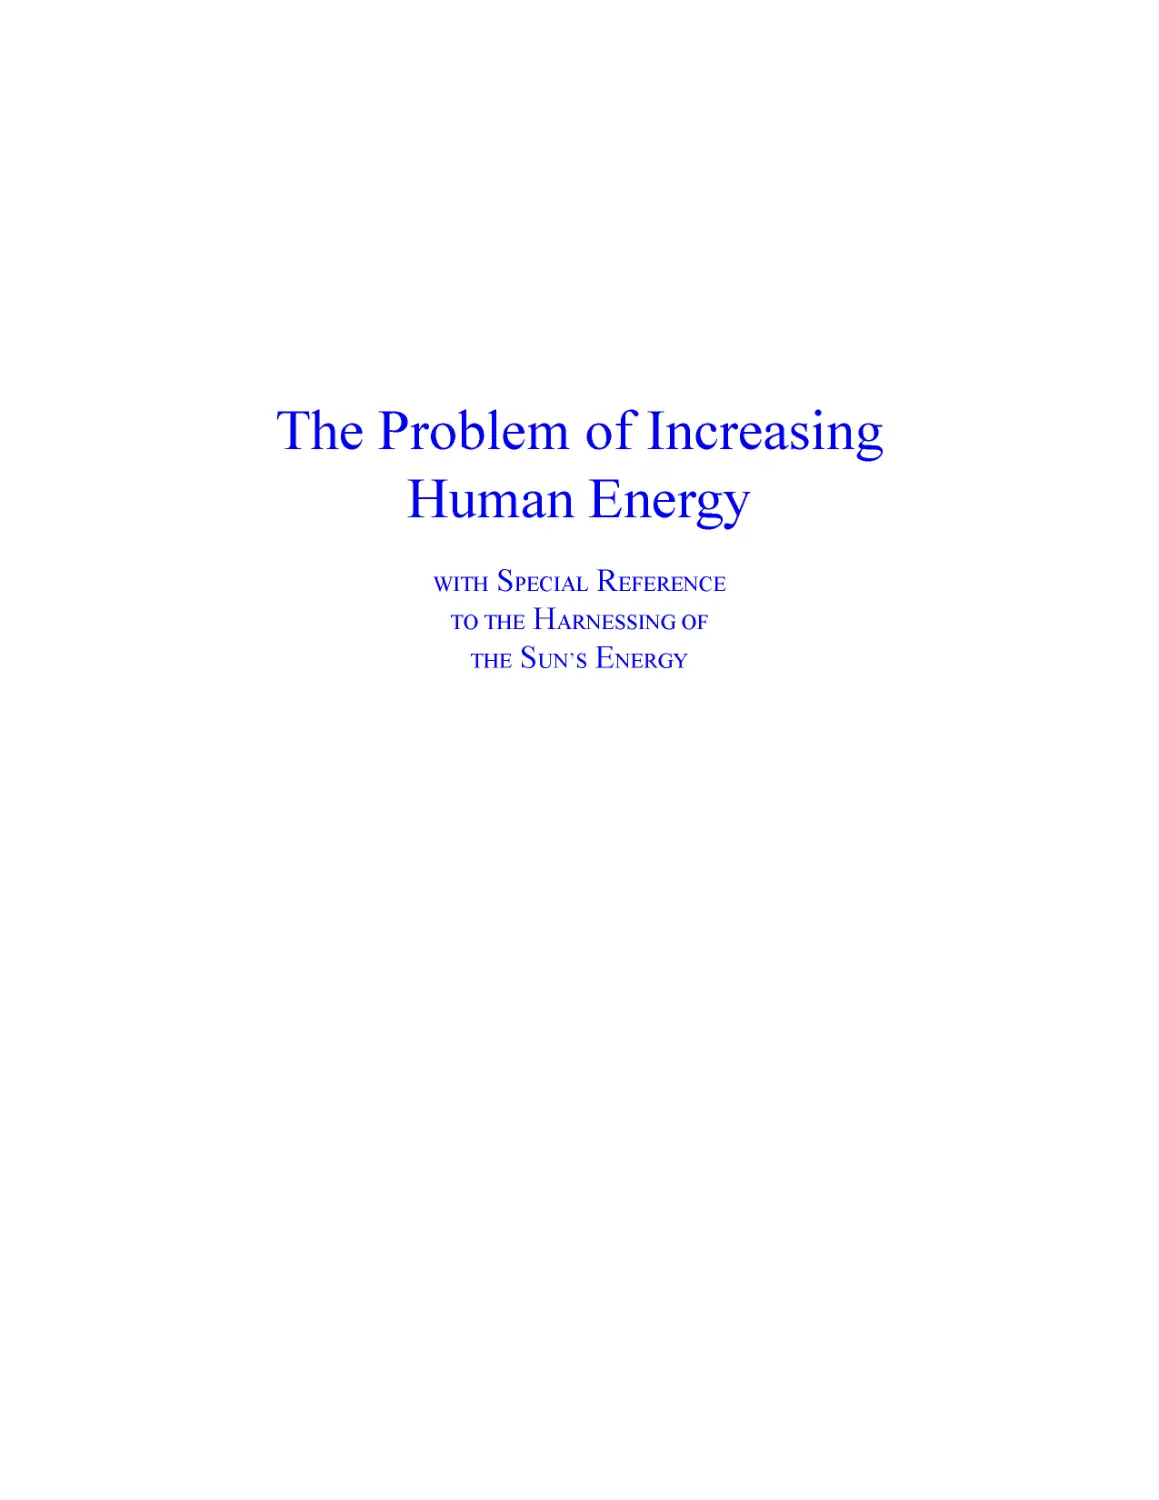 ﻿The Problem of Increasing Human Energy with Special Reference to the Harnessing of the Sun's Energ